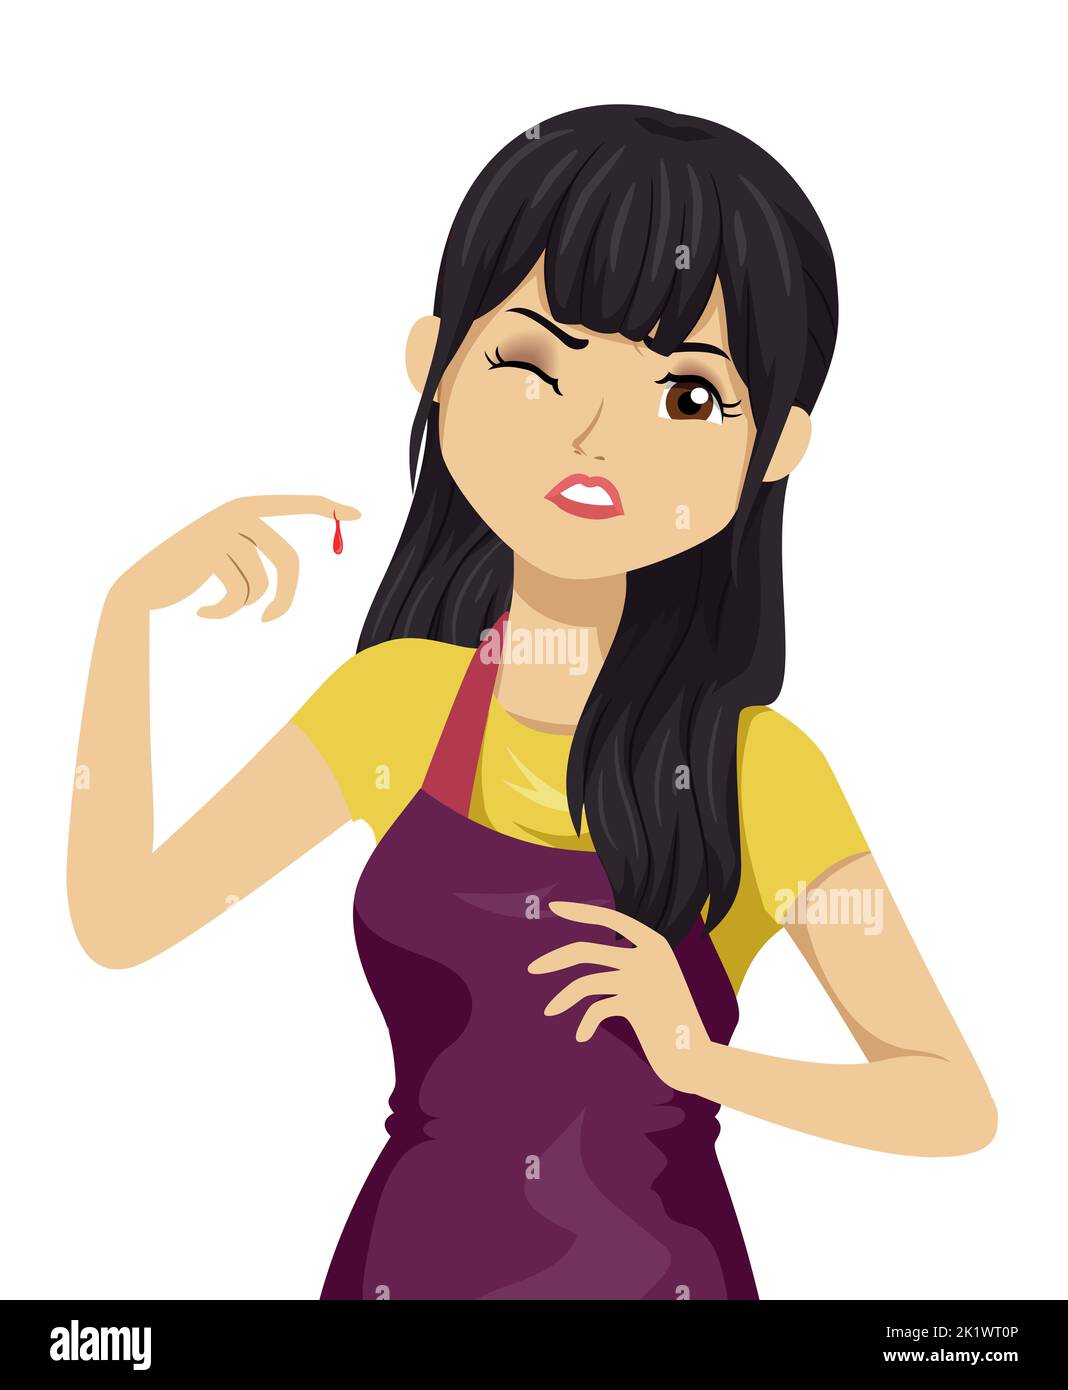 Illustration of Teen Girl Wearing Apron with Bleeding Cut on Finger while Prepping Food Stock Photo